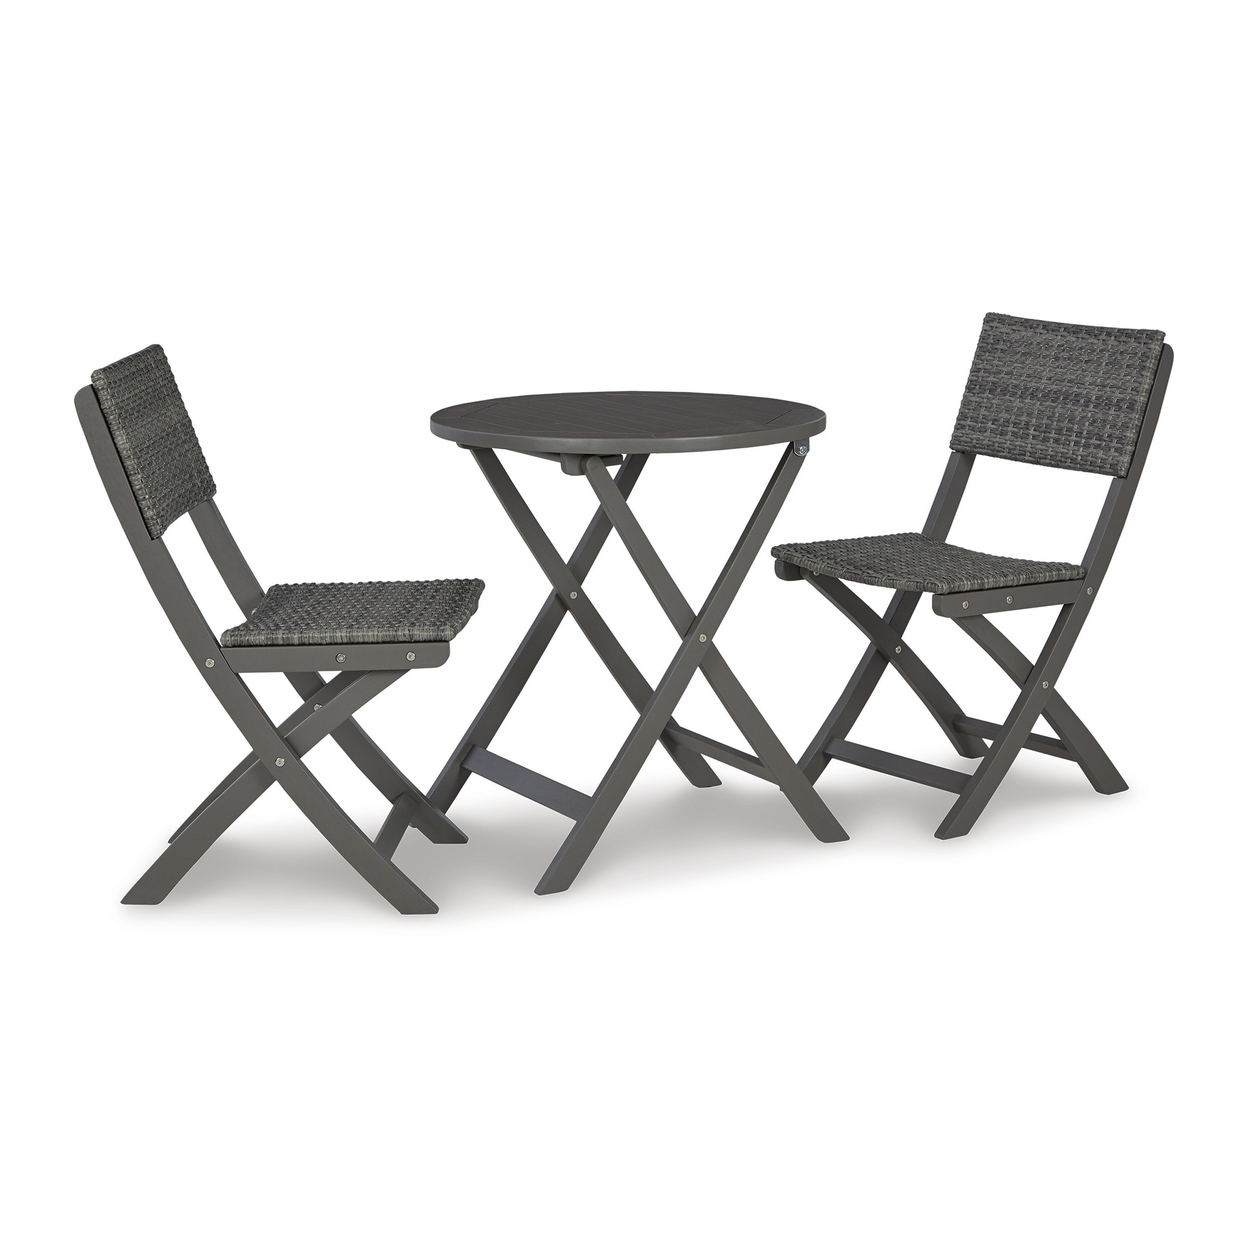 3 Piece Outdoor Table And Chair Occasional Set, Resin Wicker, Gray Wood - Saltoro Sherpi